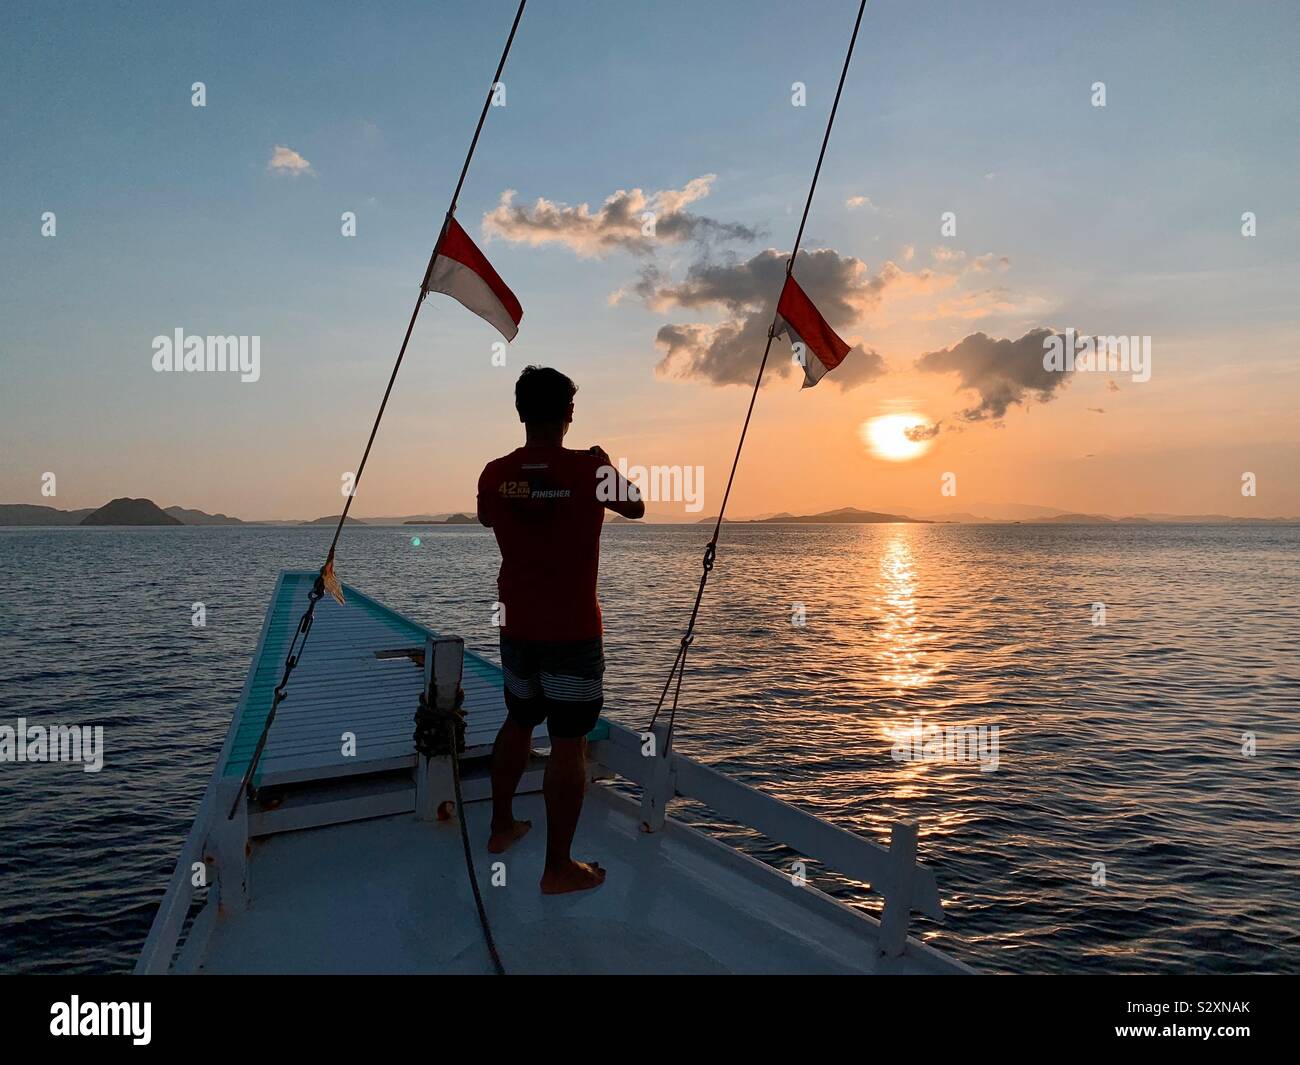 Capturing sunsets by the yatch Stock Photo